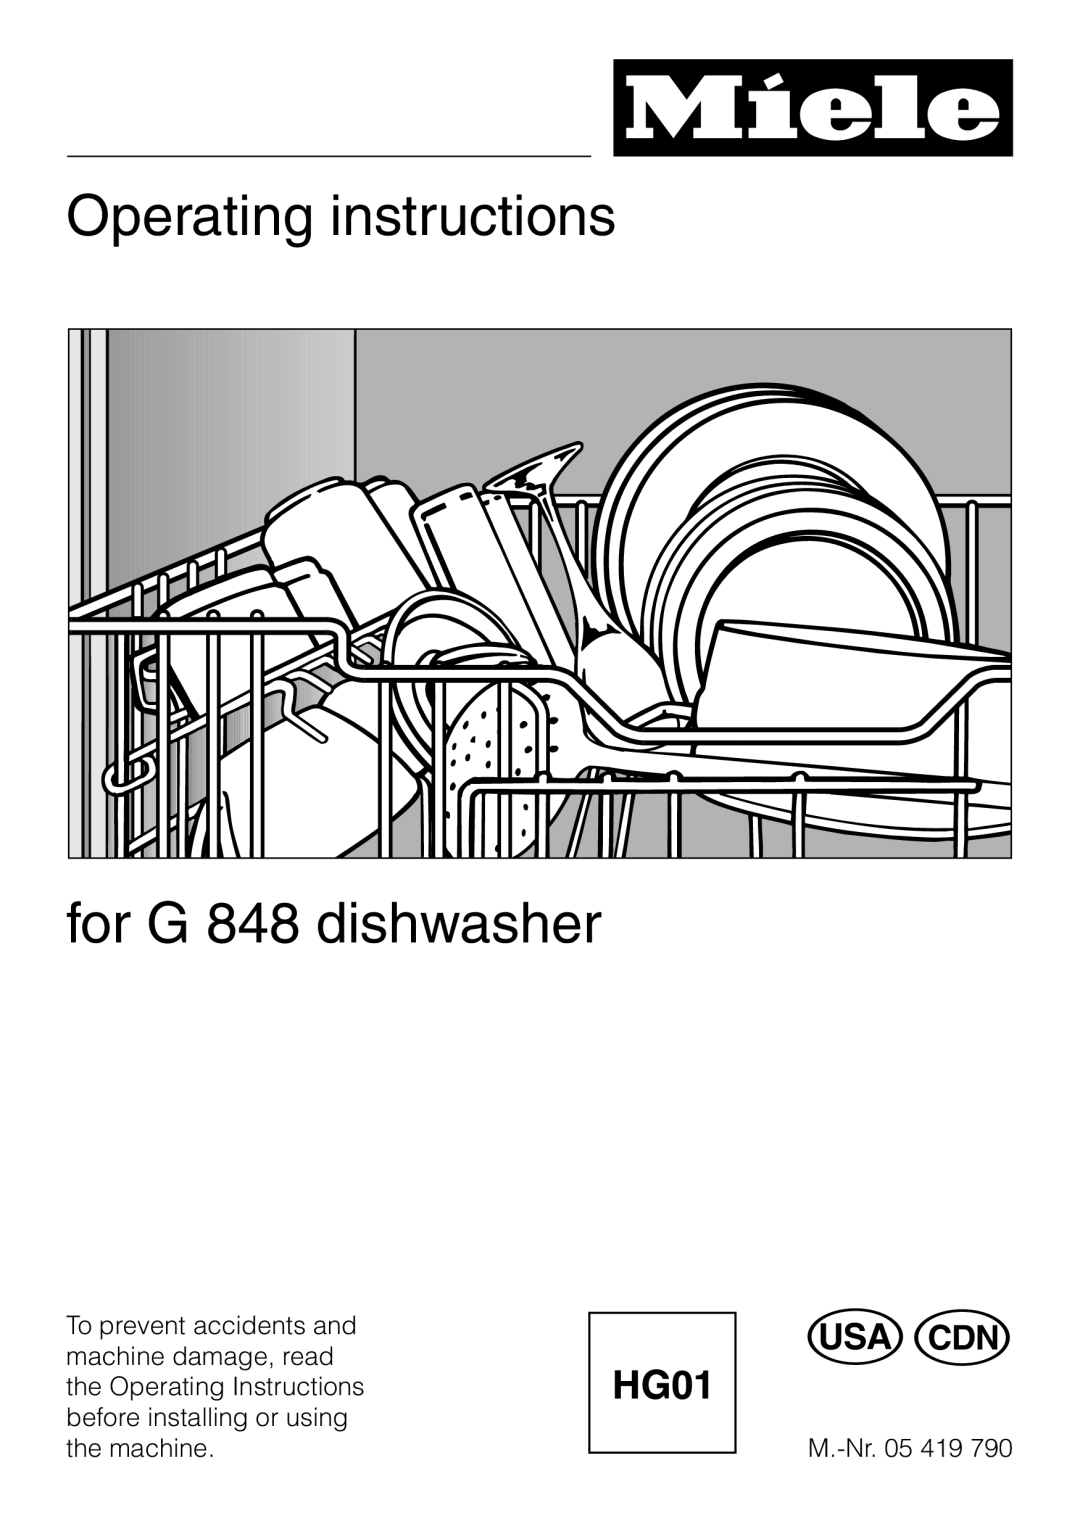 Miele G848 manual Operating instructions for G 848 dishwasher 